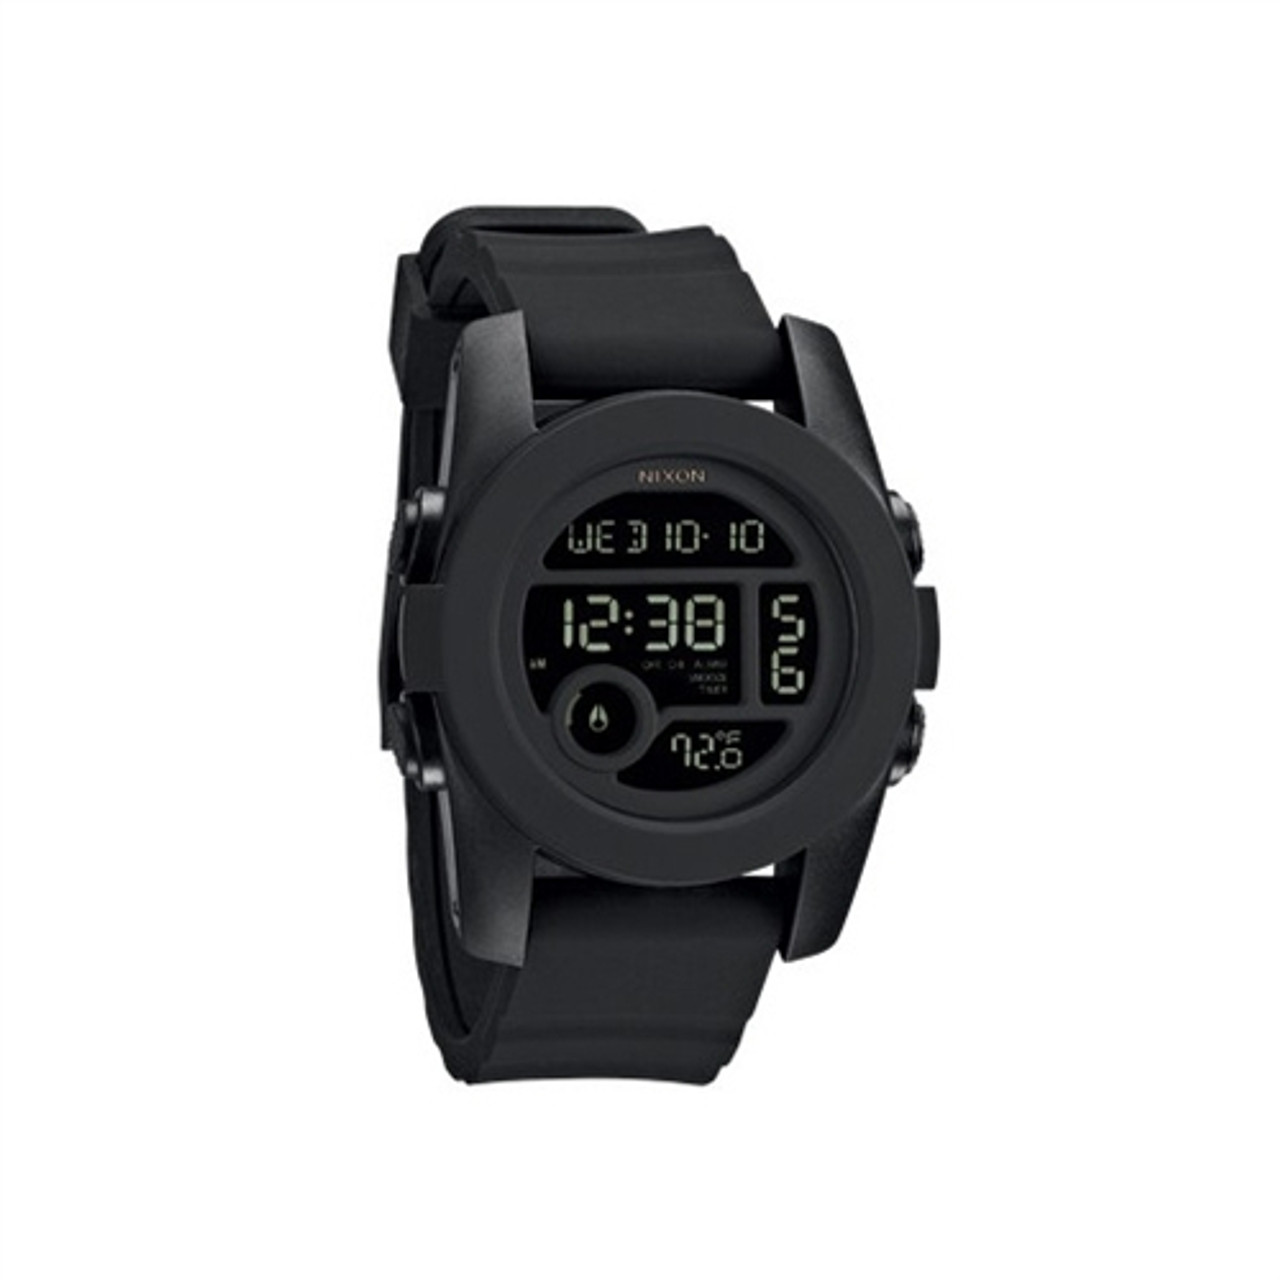 MakeTheStyle 9060 Green 9060 Green A1 Digital Watch - For Men - Buy  MakeTheStyle 9060 Green 9060 Green A1 Digital Watch - For Men 9060 Multi  function digital watch Online at Best Prices in India | Flipkart.com